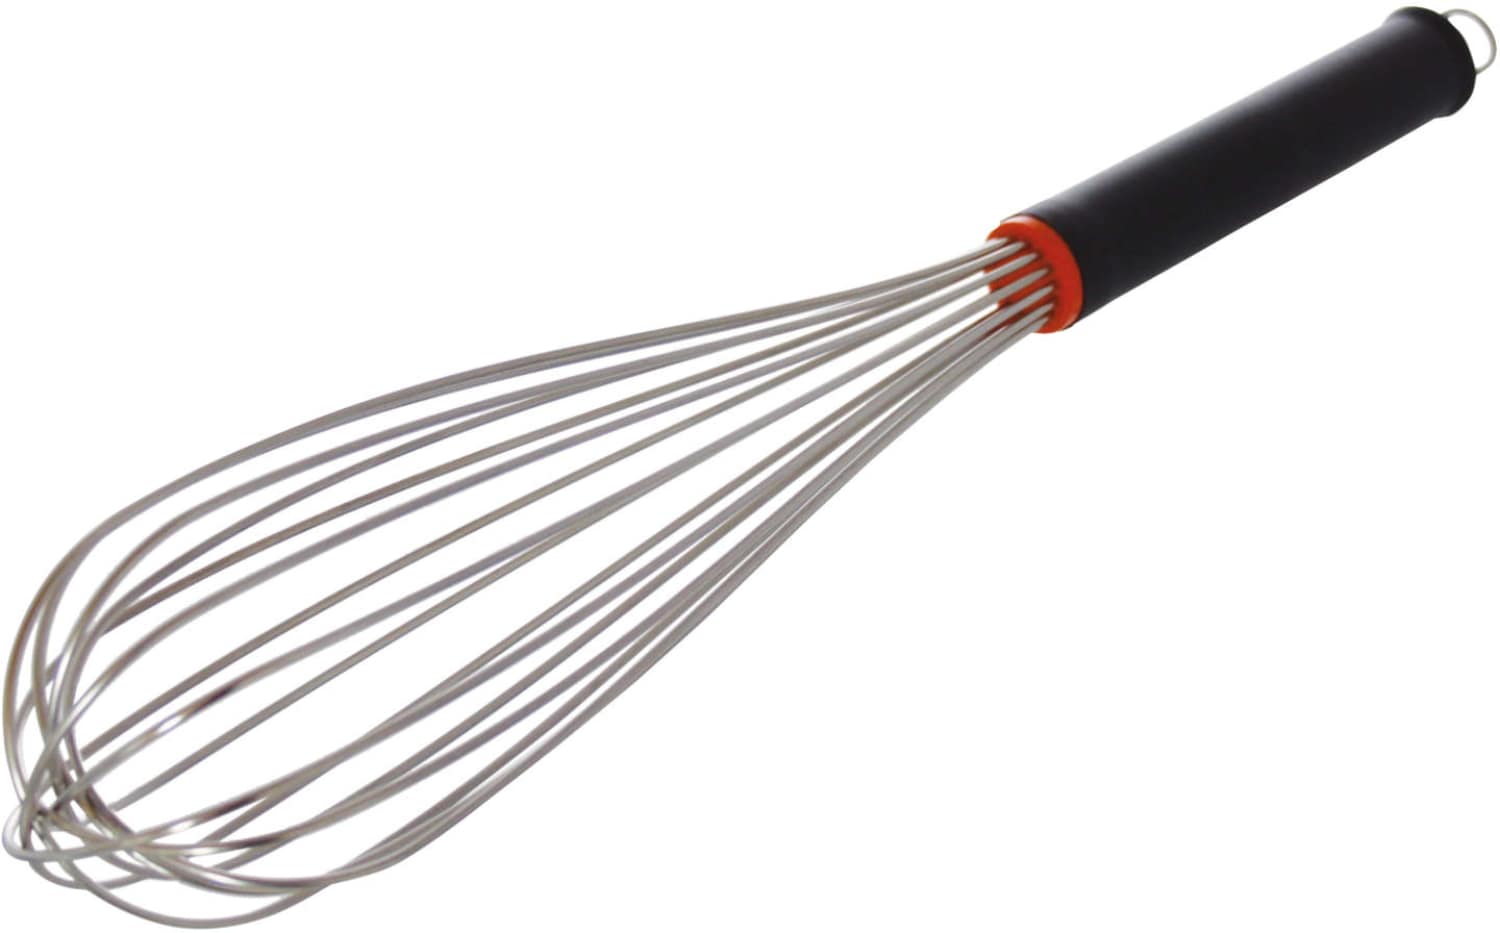 Whisk thermoplastic handle